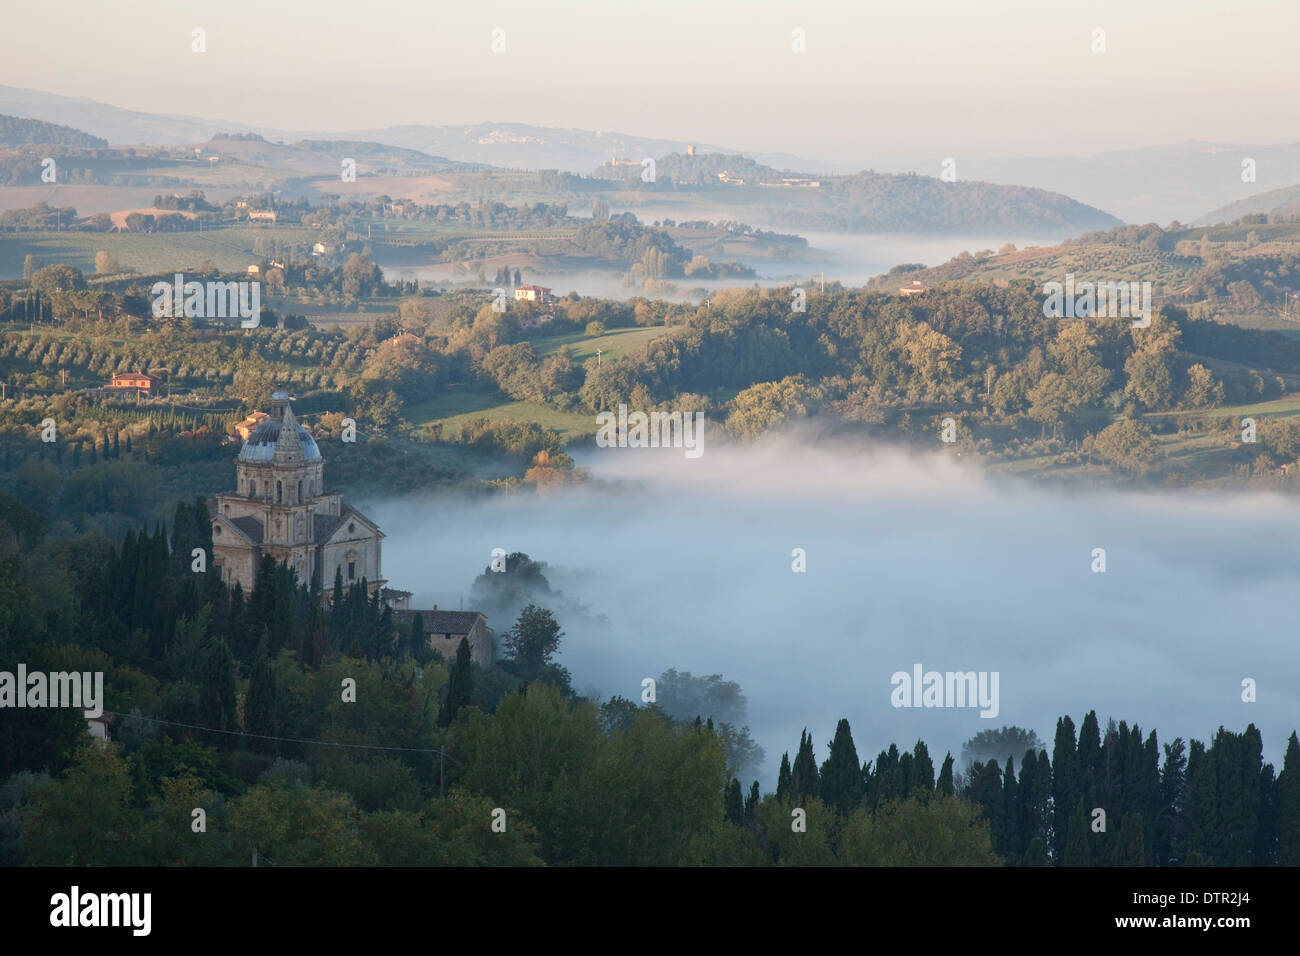 Morning mist and sunlight on San Biagio and the slopes below Montepulciano, Tuscany, Italy. Mandatory credit Jo Whitworth Stock Photo